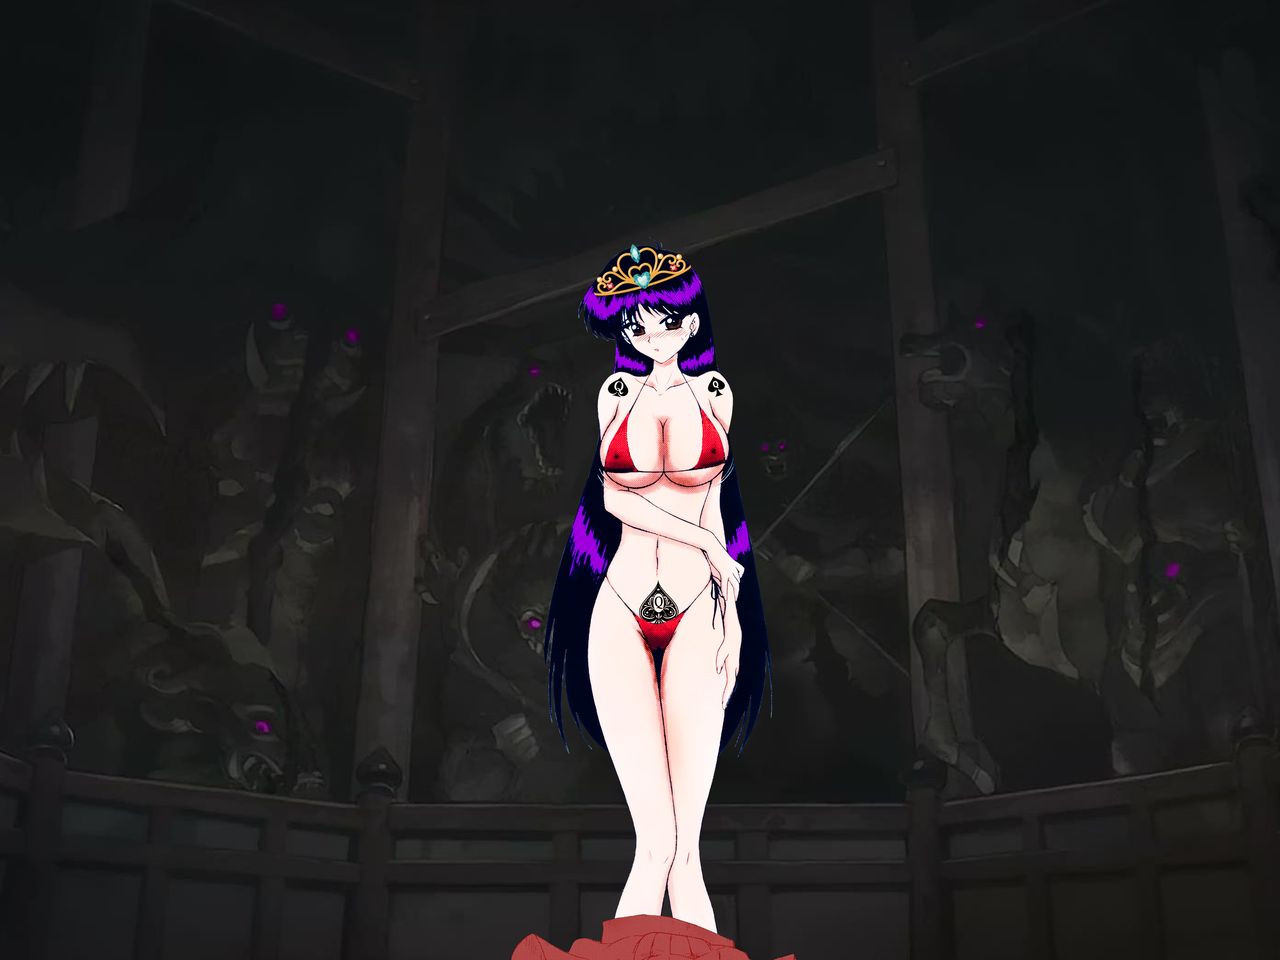 [(Black Dog)(Kuroinu Juu)] QUEEN OF SPADES [Fanmade][Chinese][Library Version]